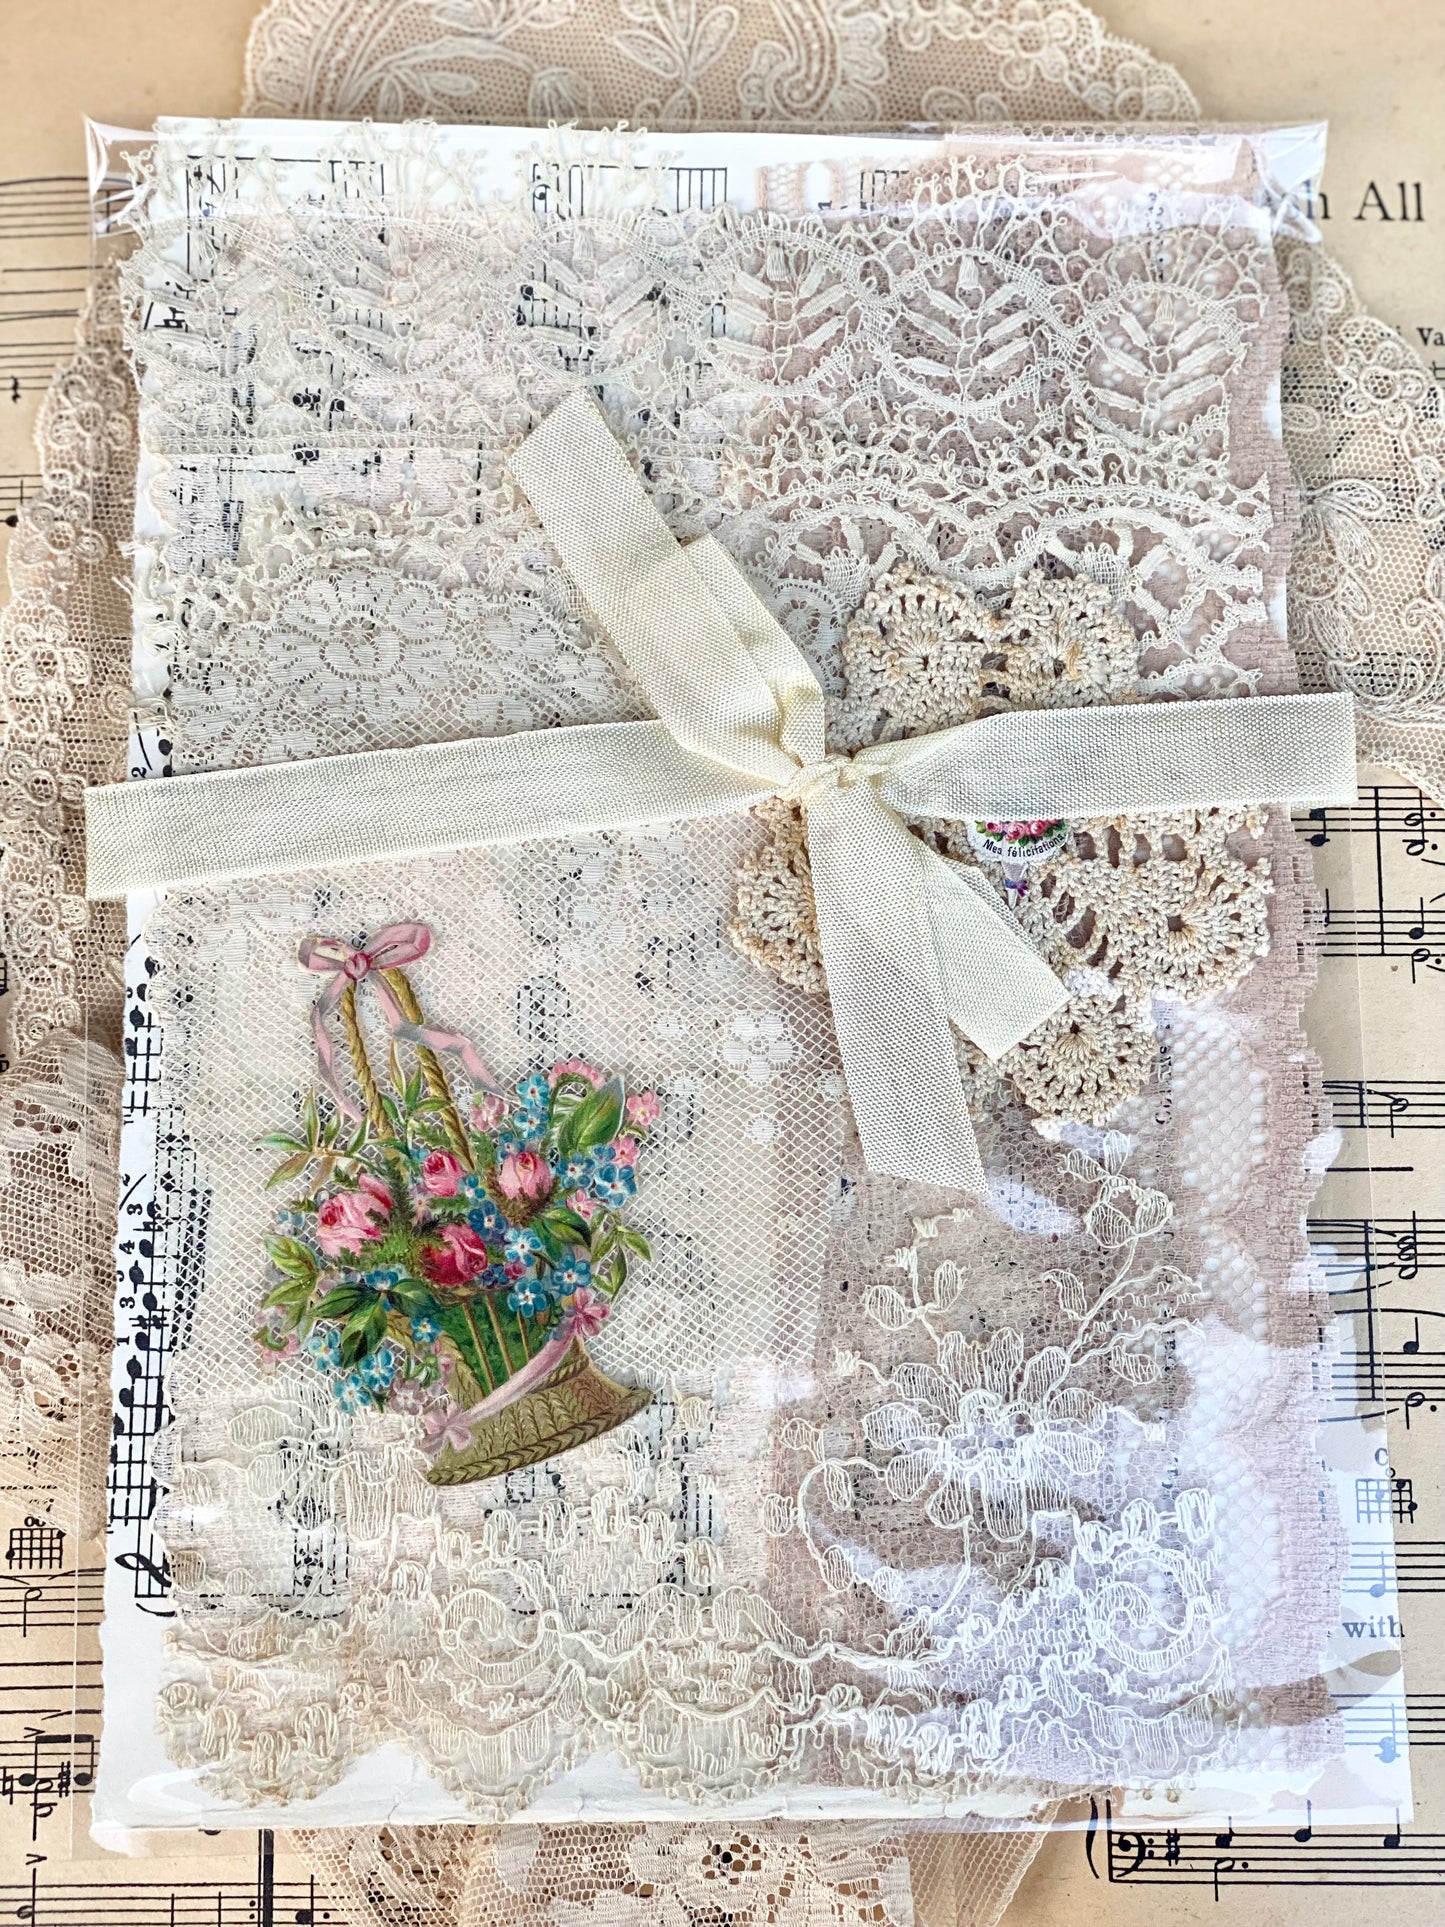 Exquisite antique lace and ephemera collection pack. Basket & lace